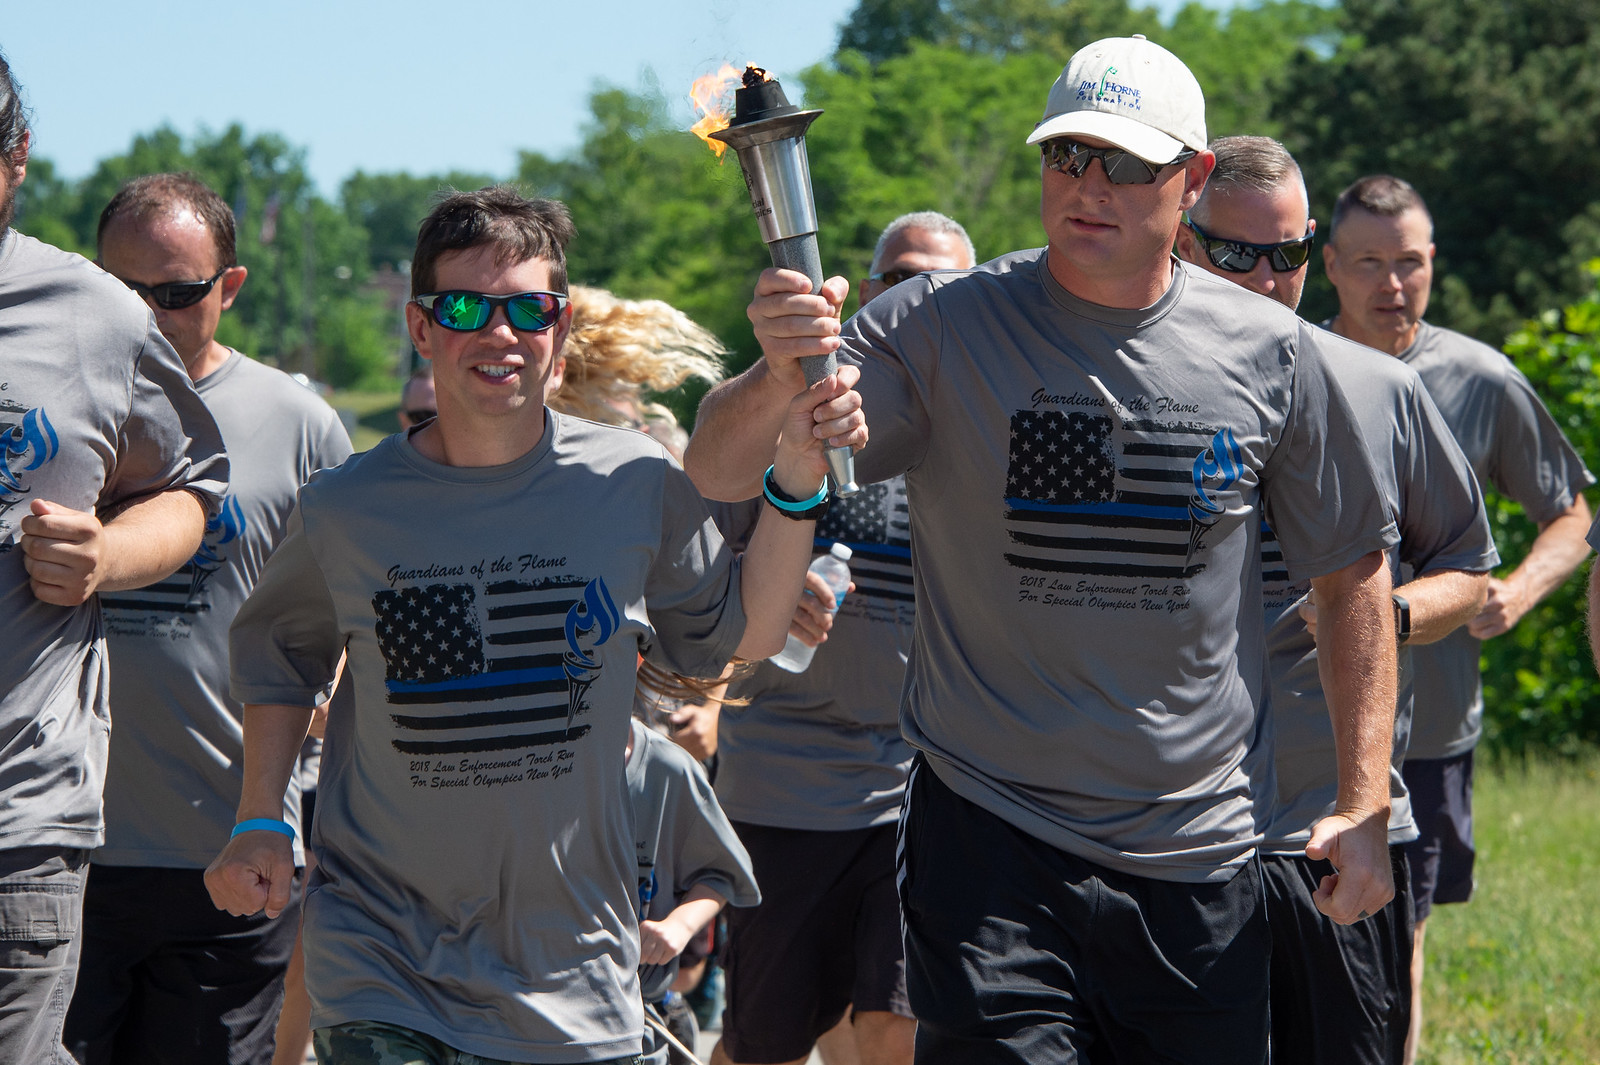 BADGES ON THE BORDER INTERNATIONAL LAW ENFORCEMENT TORCH RUN TO BENEFIT ...